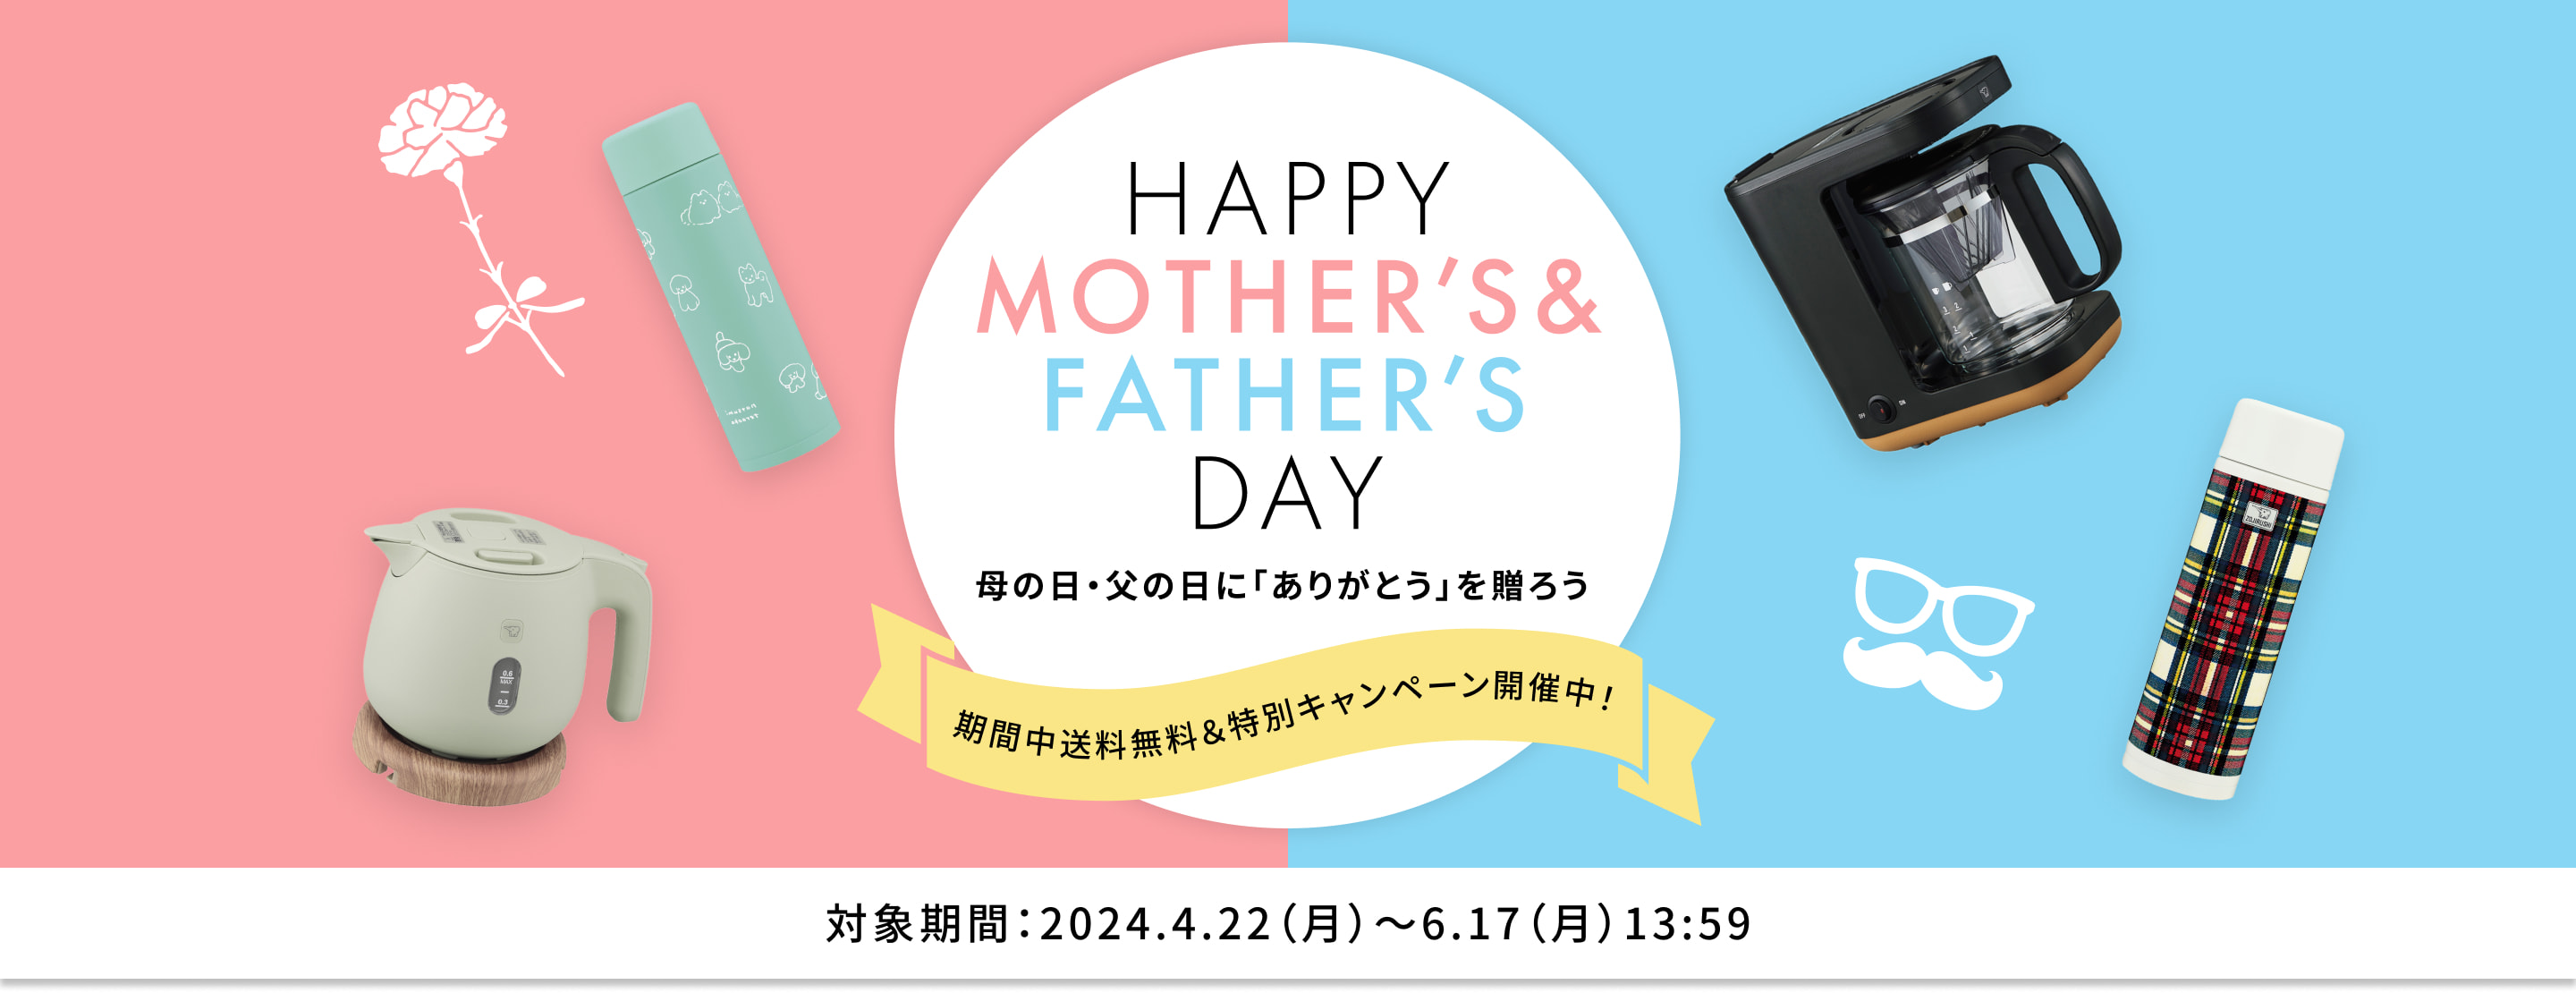 HAPPY MOTHER'S & FATHER'S DAY 母の日・父の日に「ありがとう」を贈ろう 【期間限定キャンペーン開催中！】 ［対象期間：2024年4月22日（月）～6月17日（月）13:59まで］